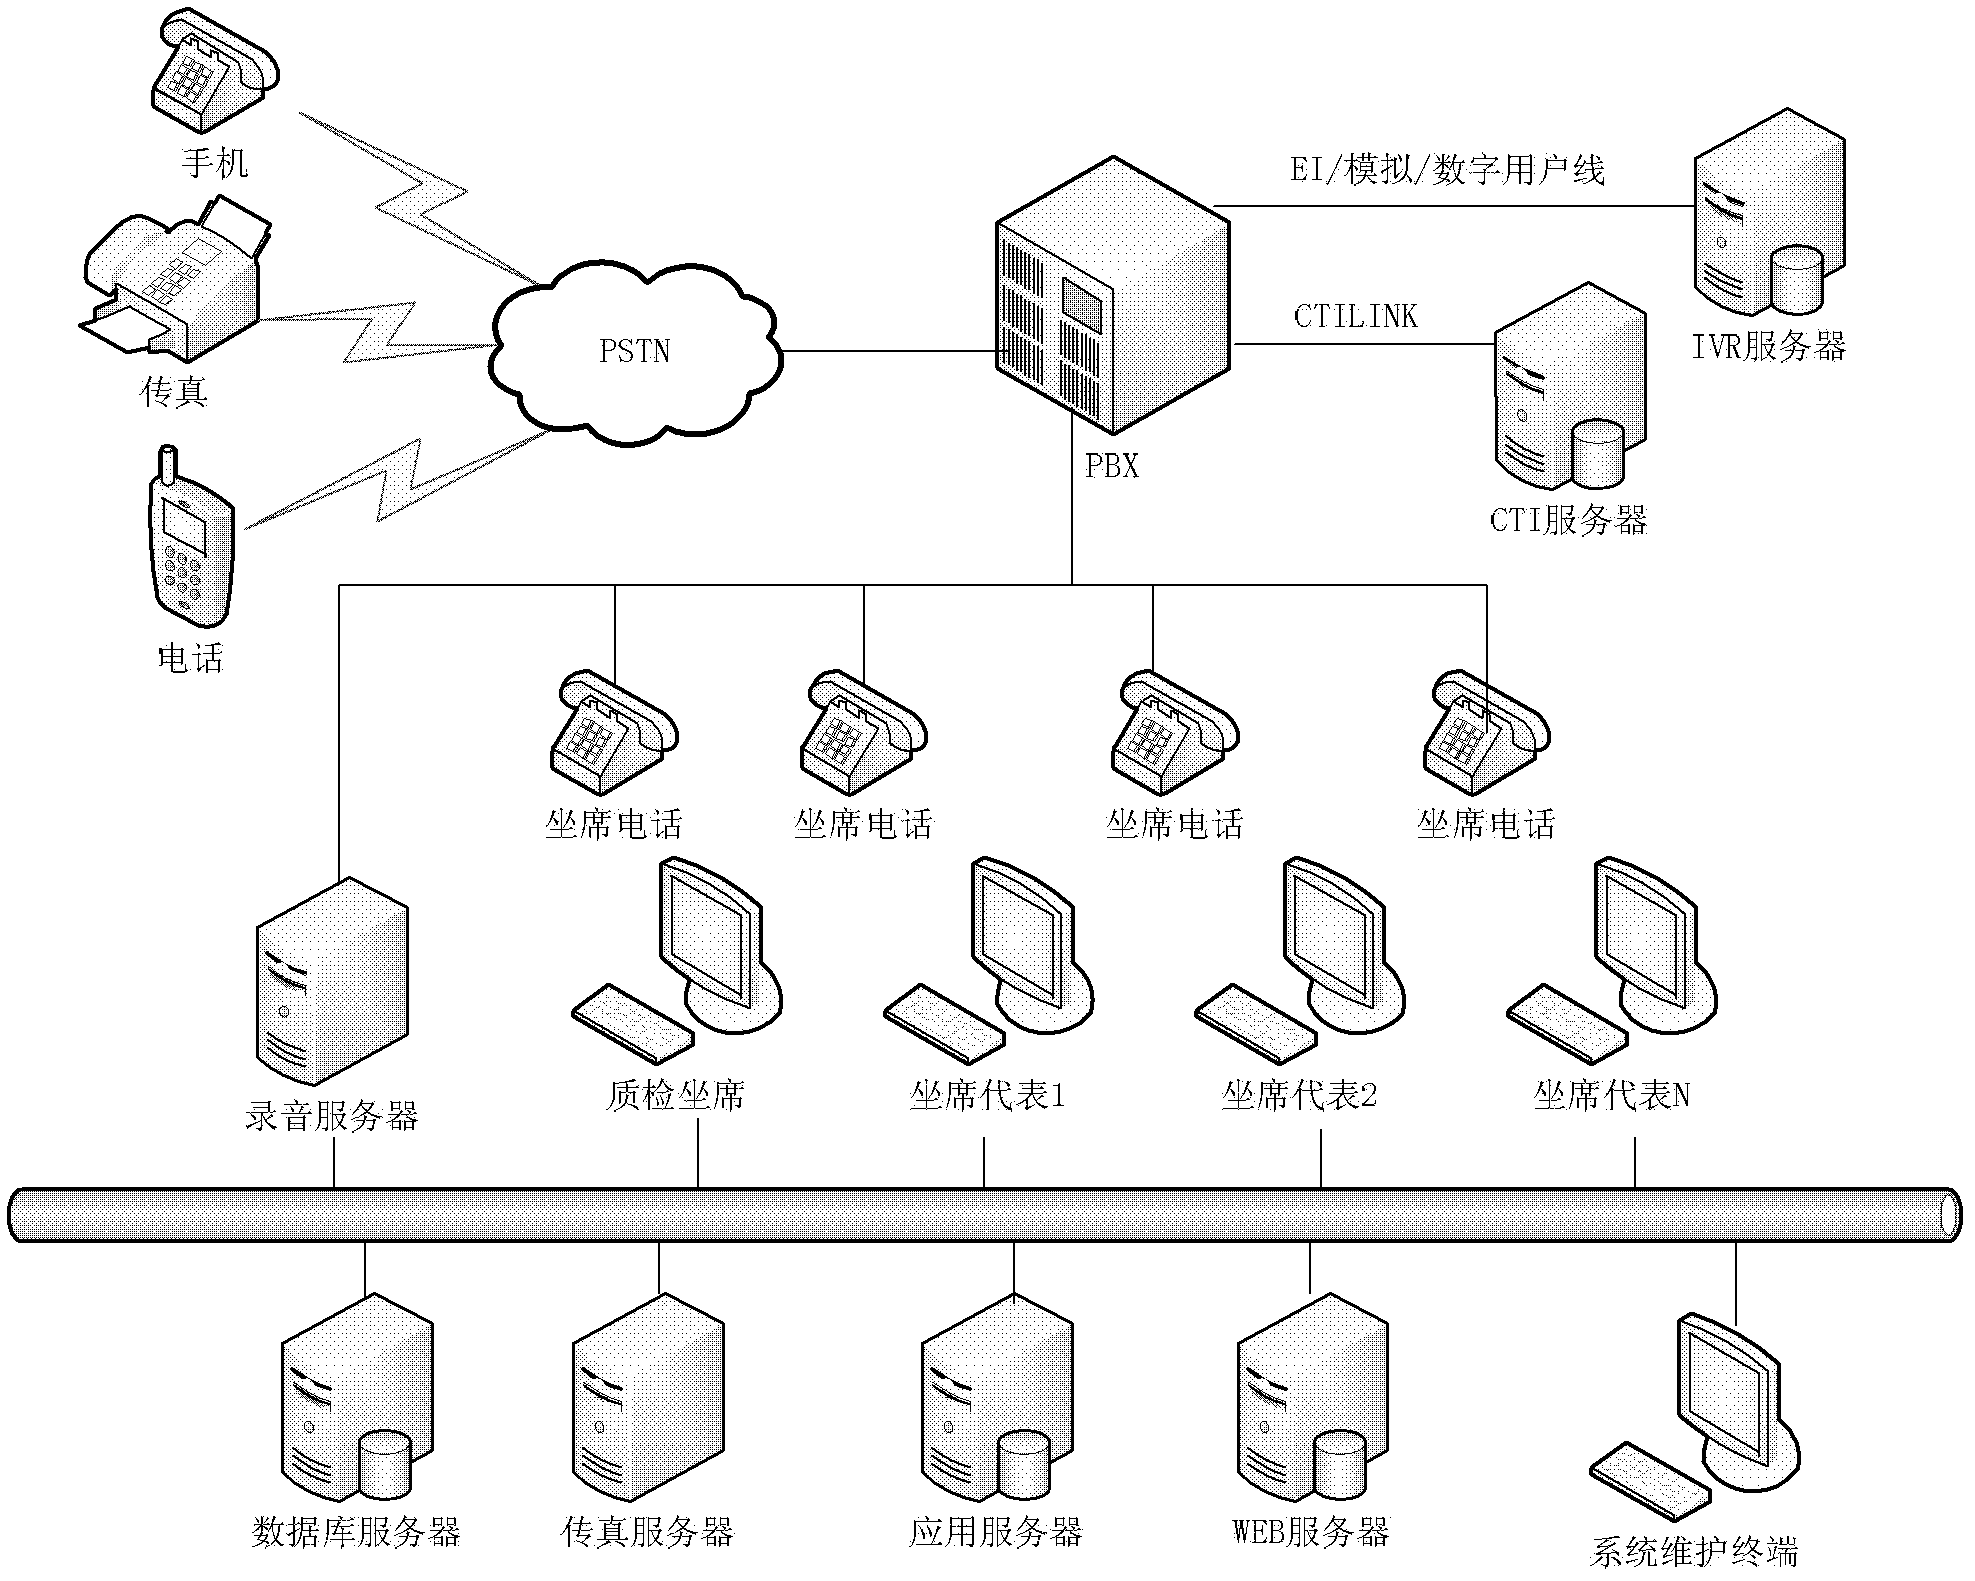 Interactive voice response system and method